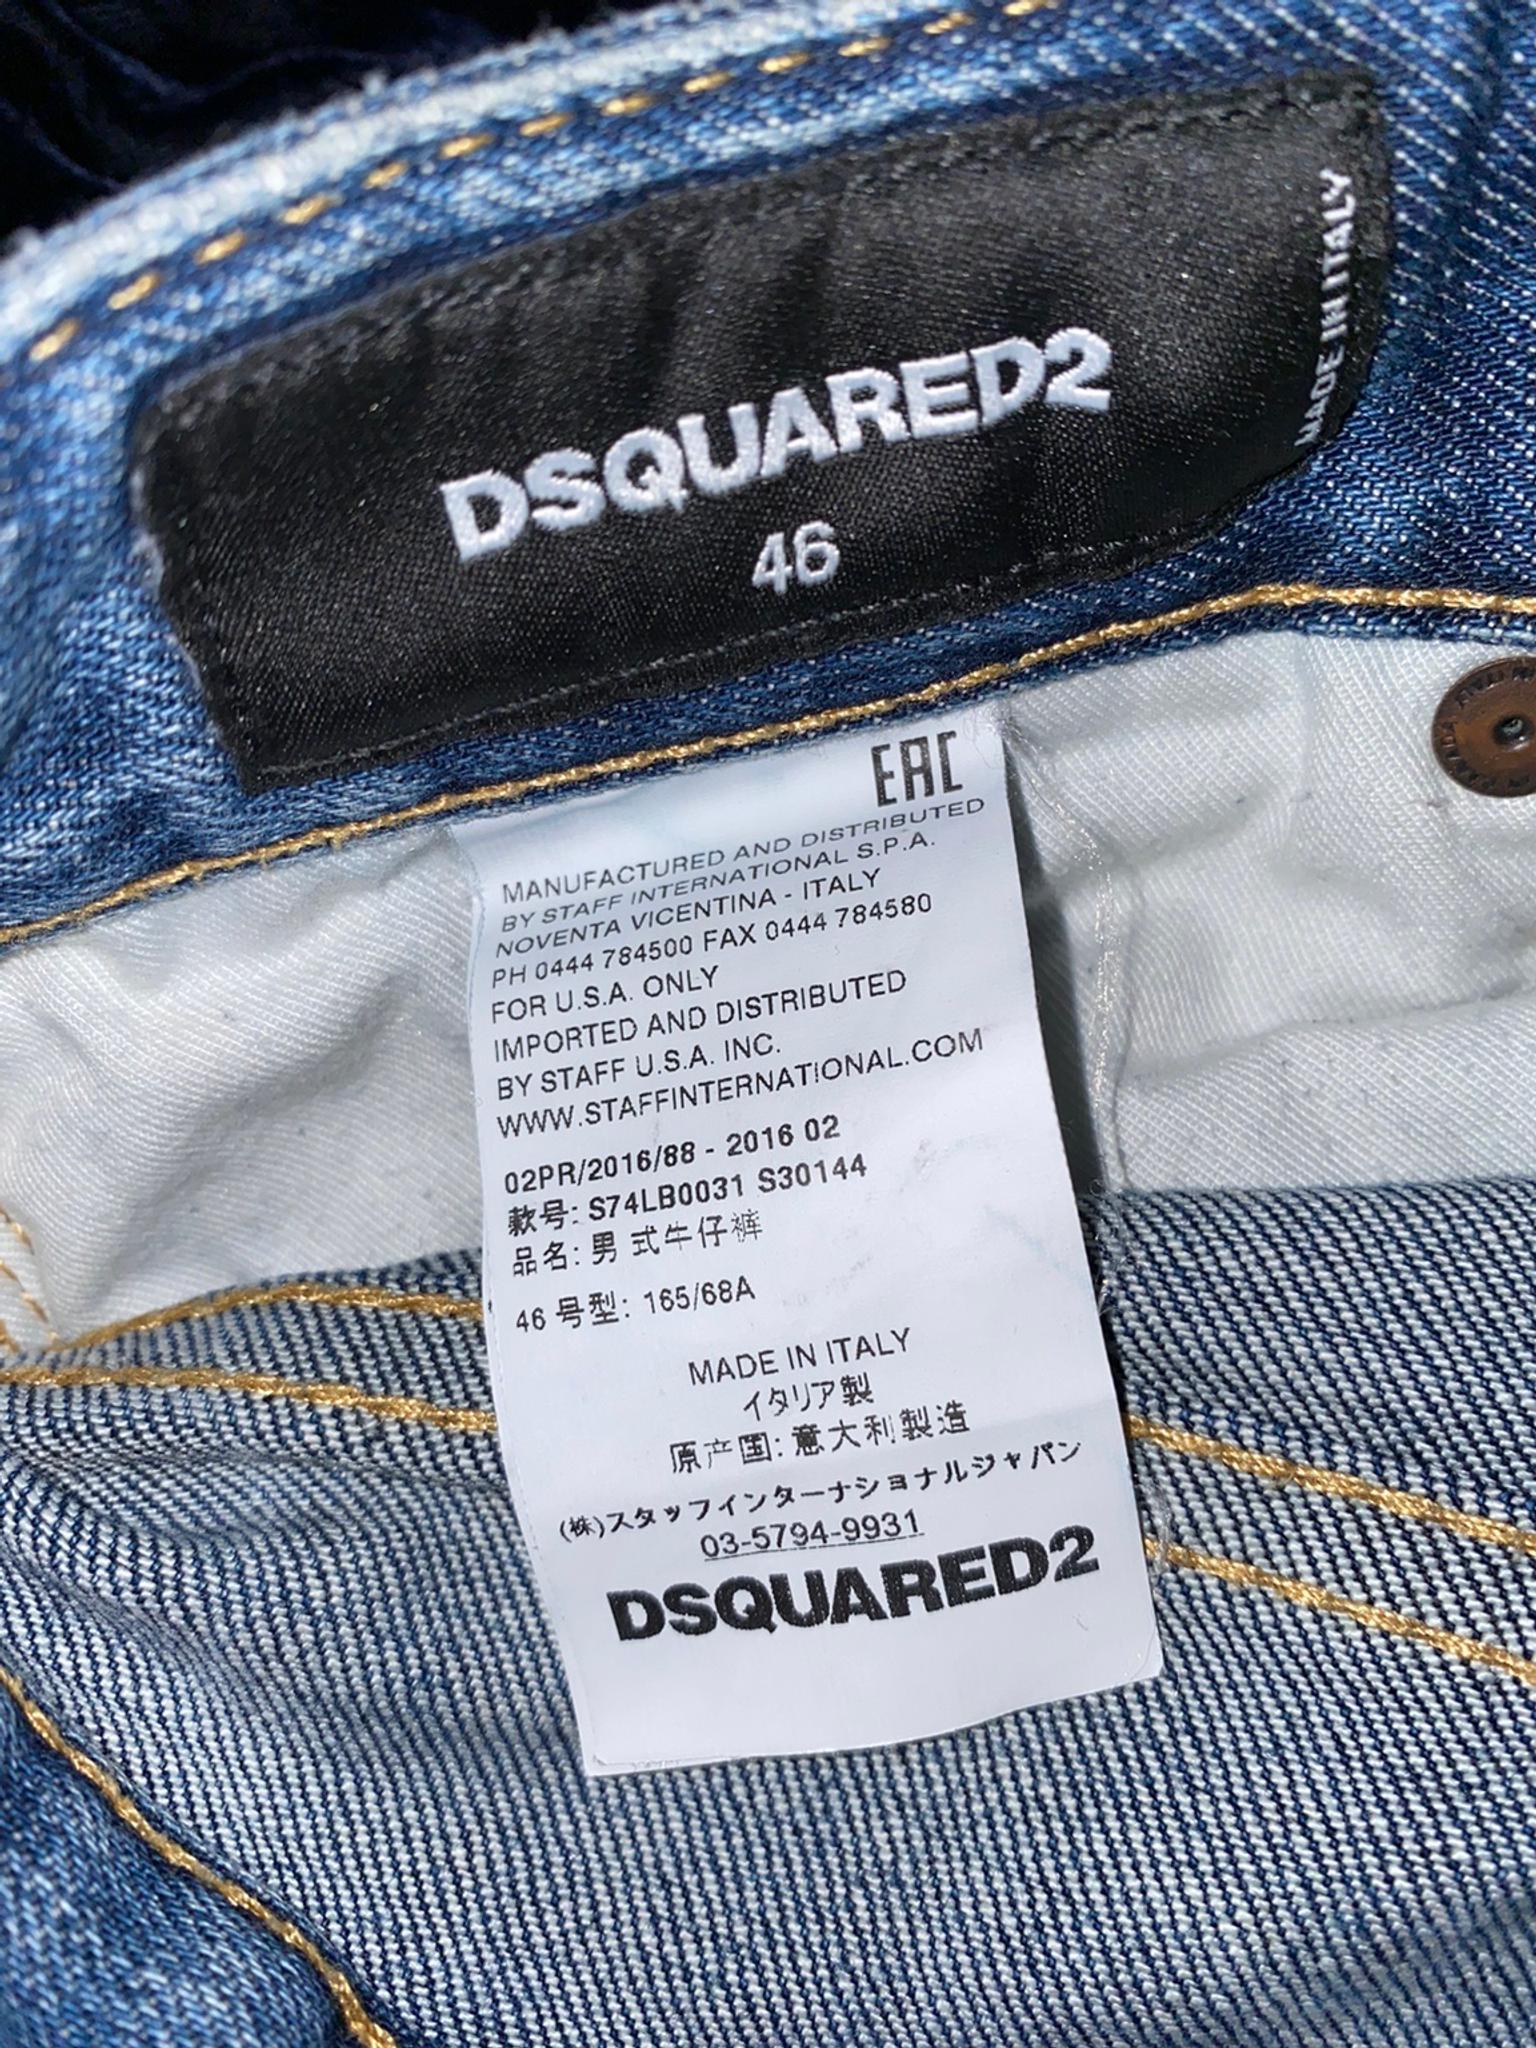 dsquared2 tag